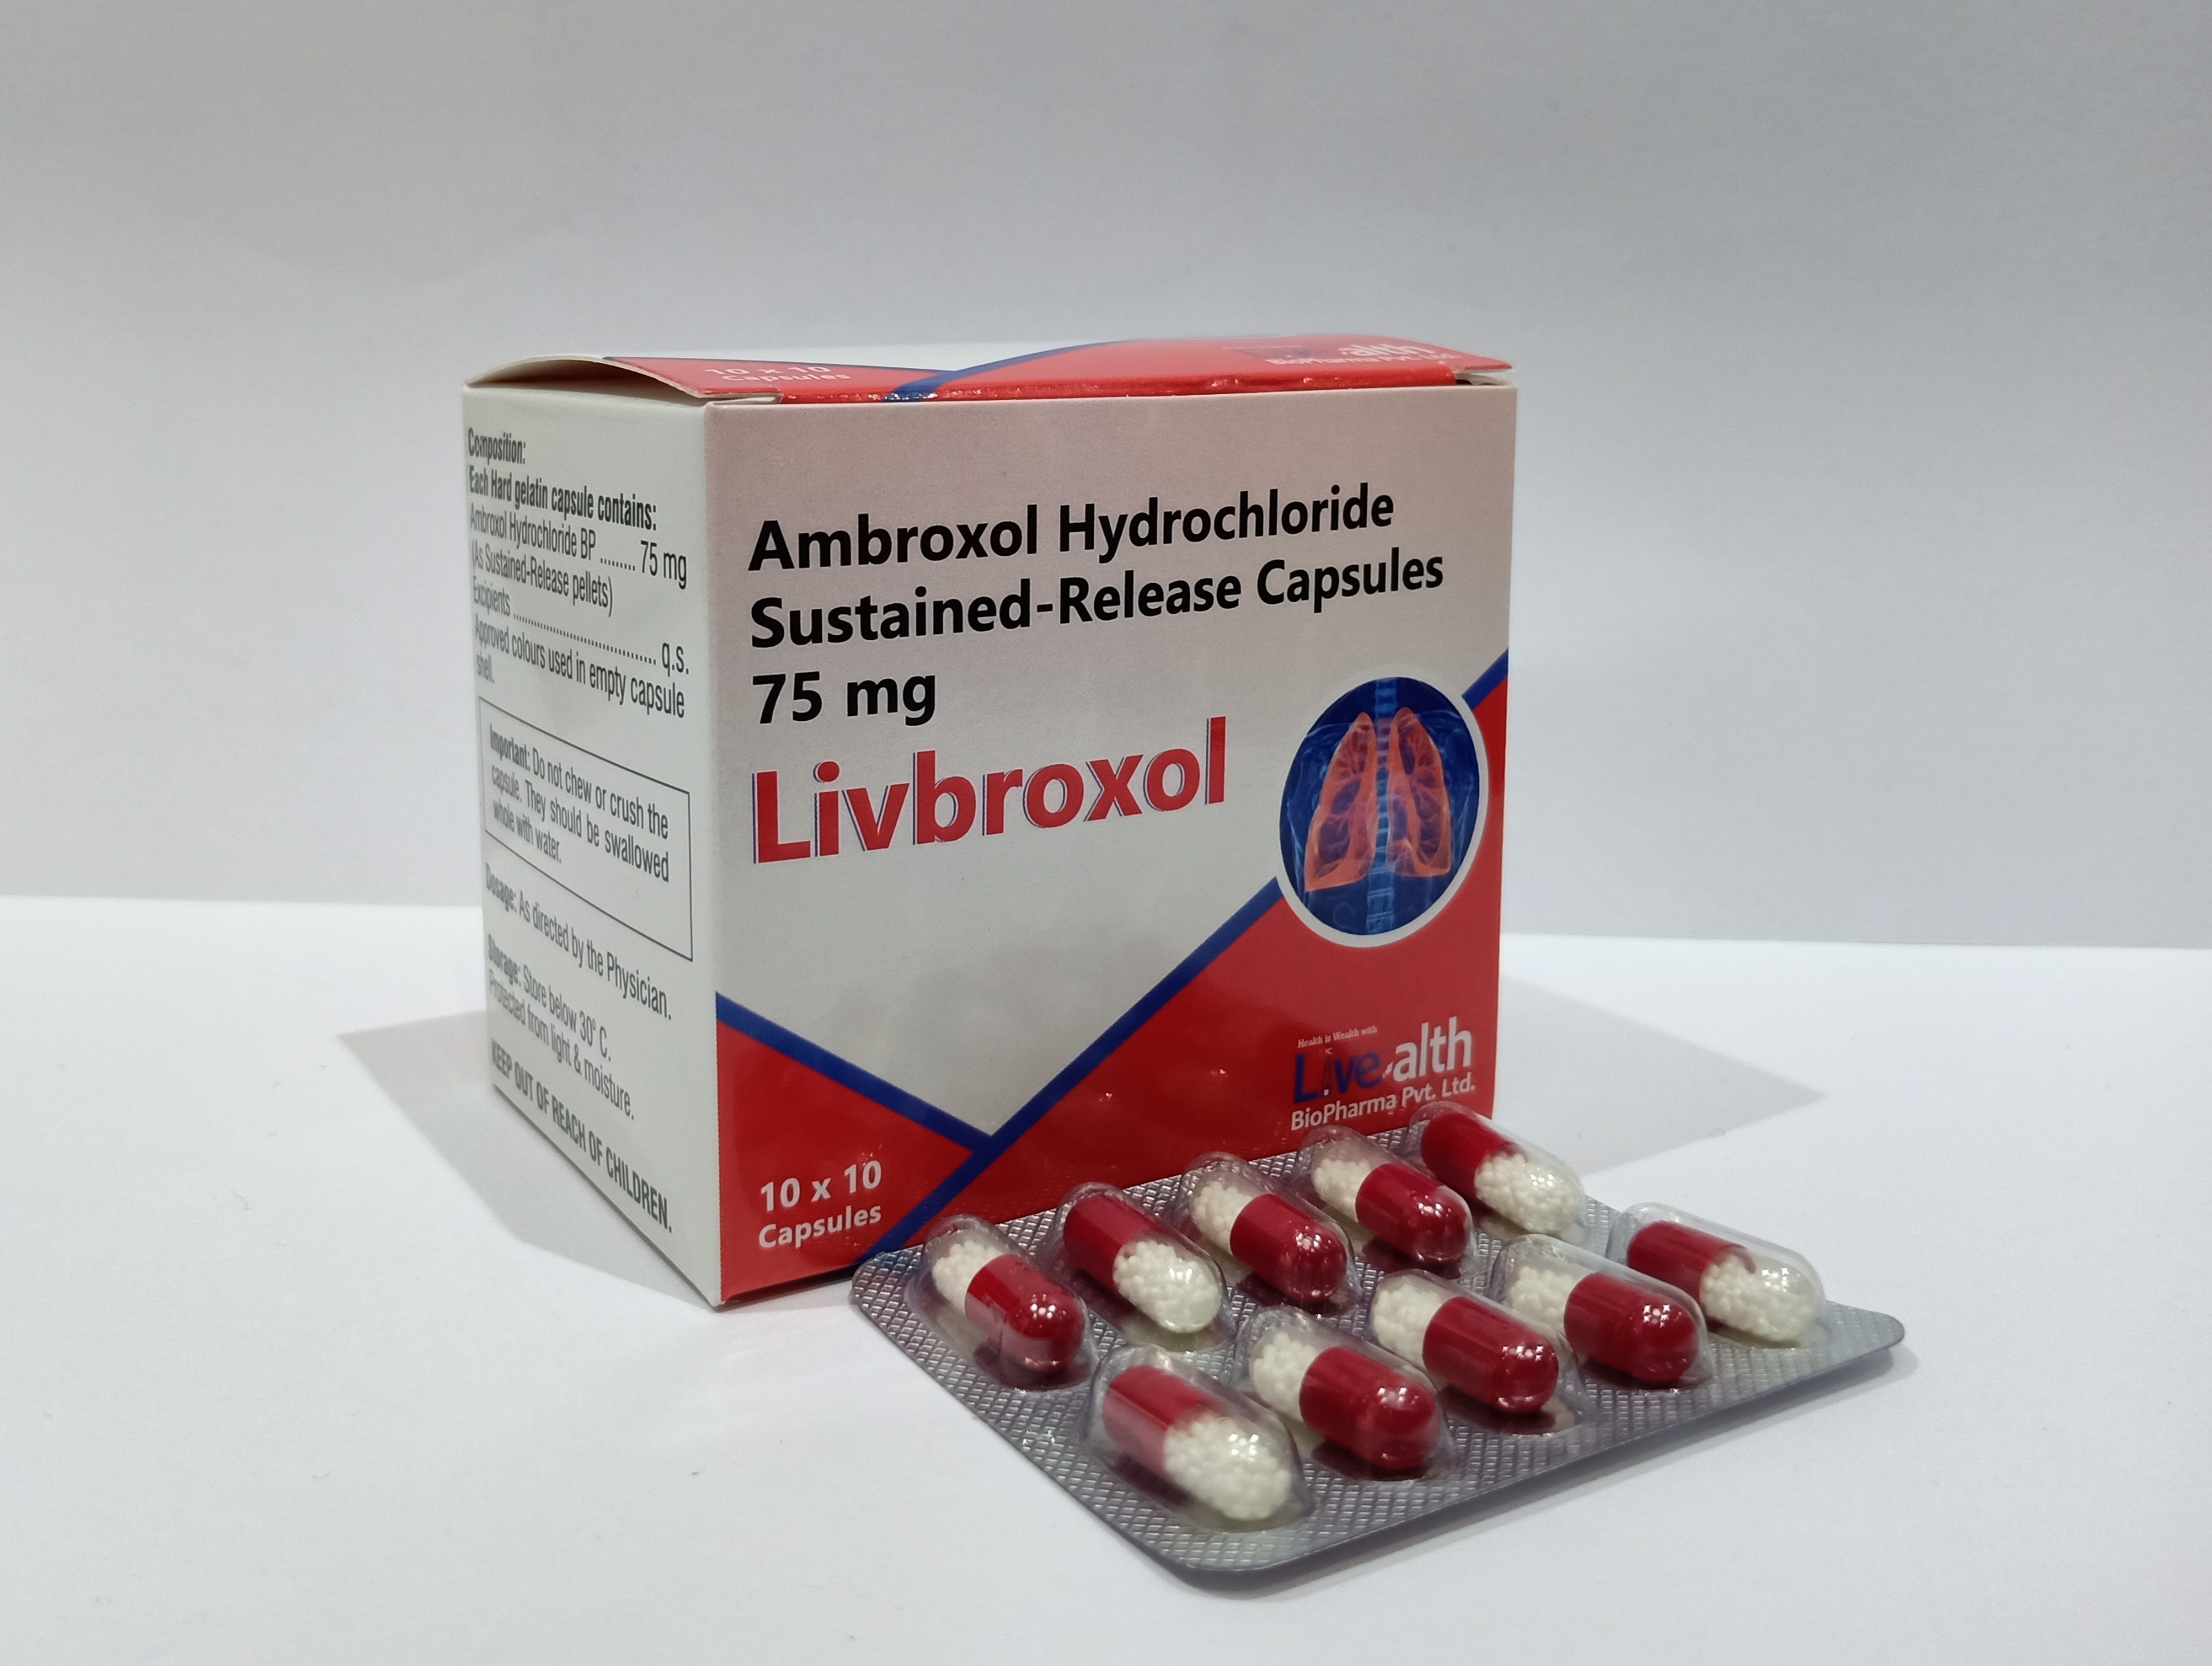 Ambroxol Hydrochloride Capsules 75 mg